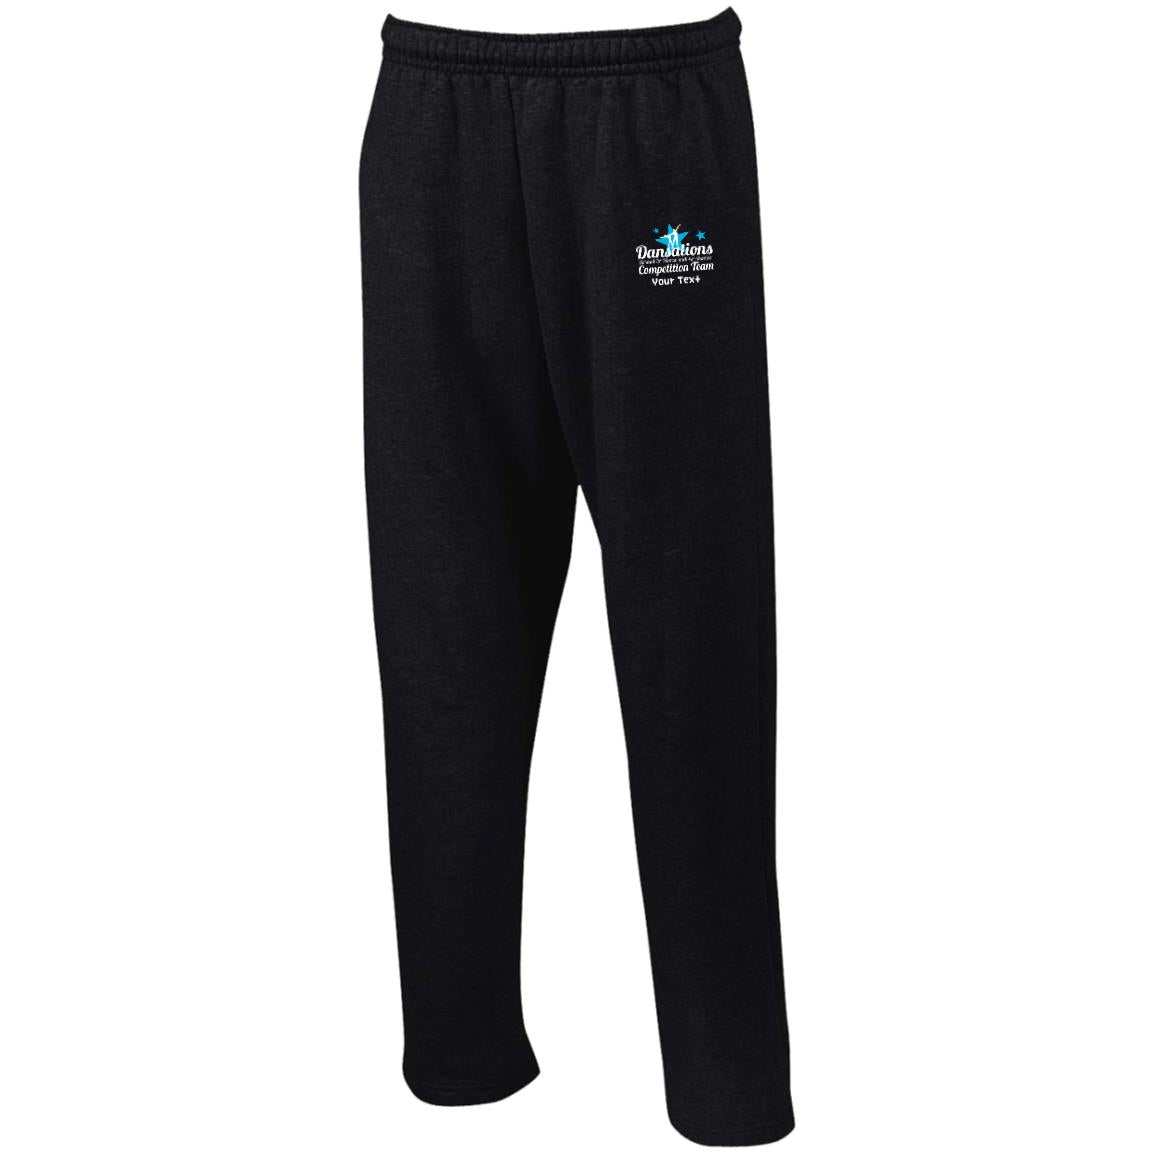 Dansations Competition Team Open Bottom Sweatpants with Pockets